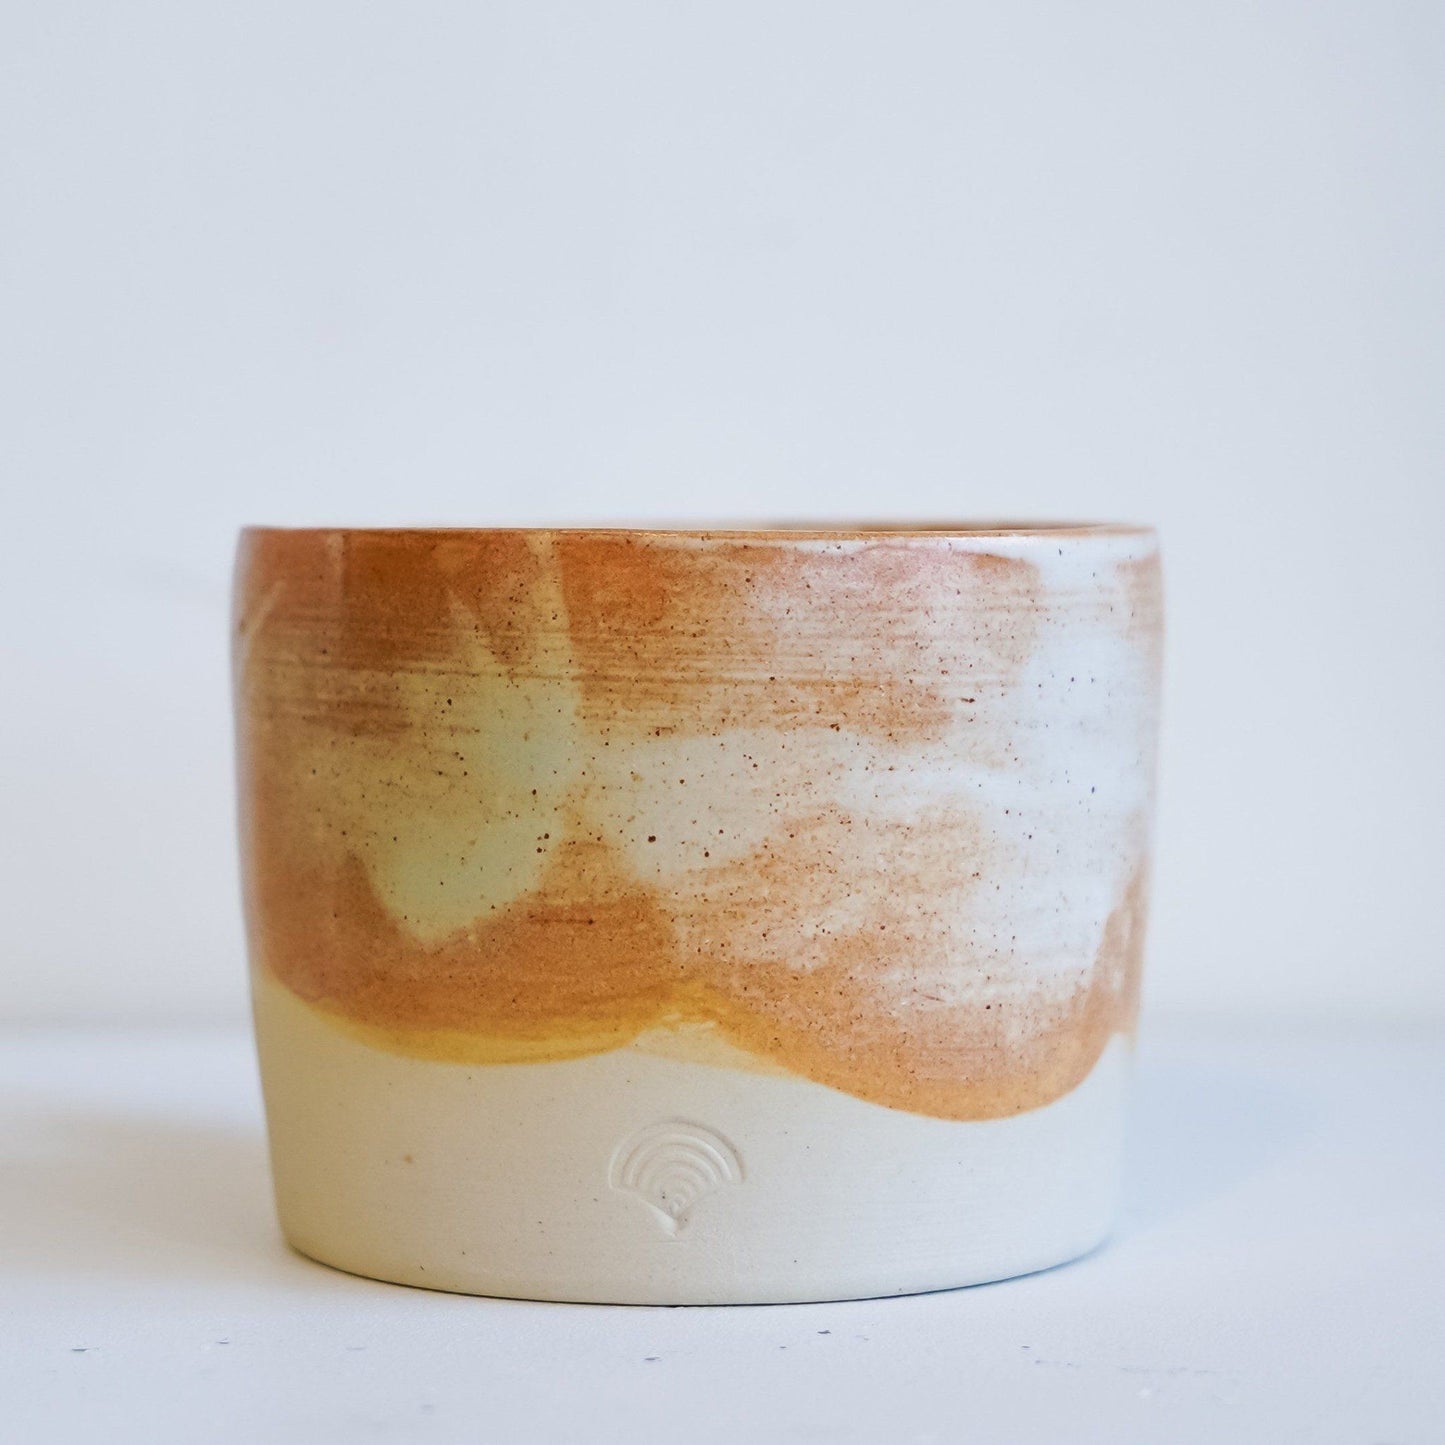 Orange matte teacup style 1 by Ceramics by George - Toast and honey studio